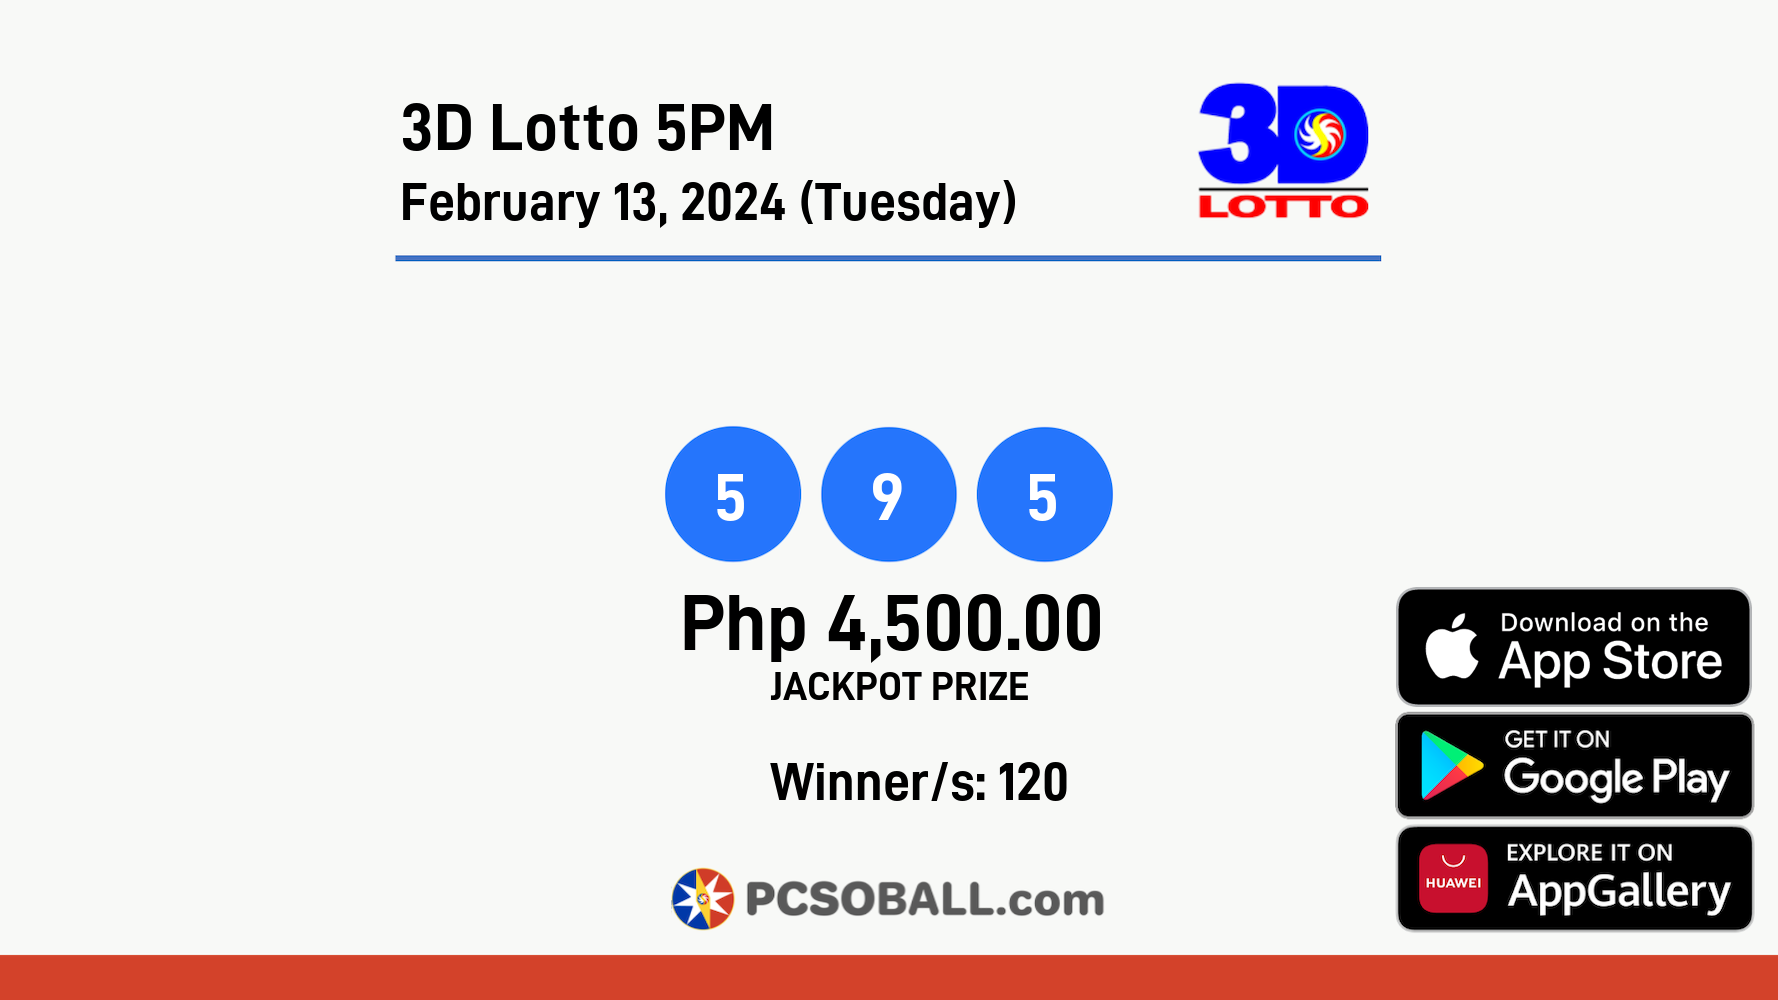 3D Lotto 5PM February 13, 2024 (Tuesday) Result